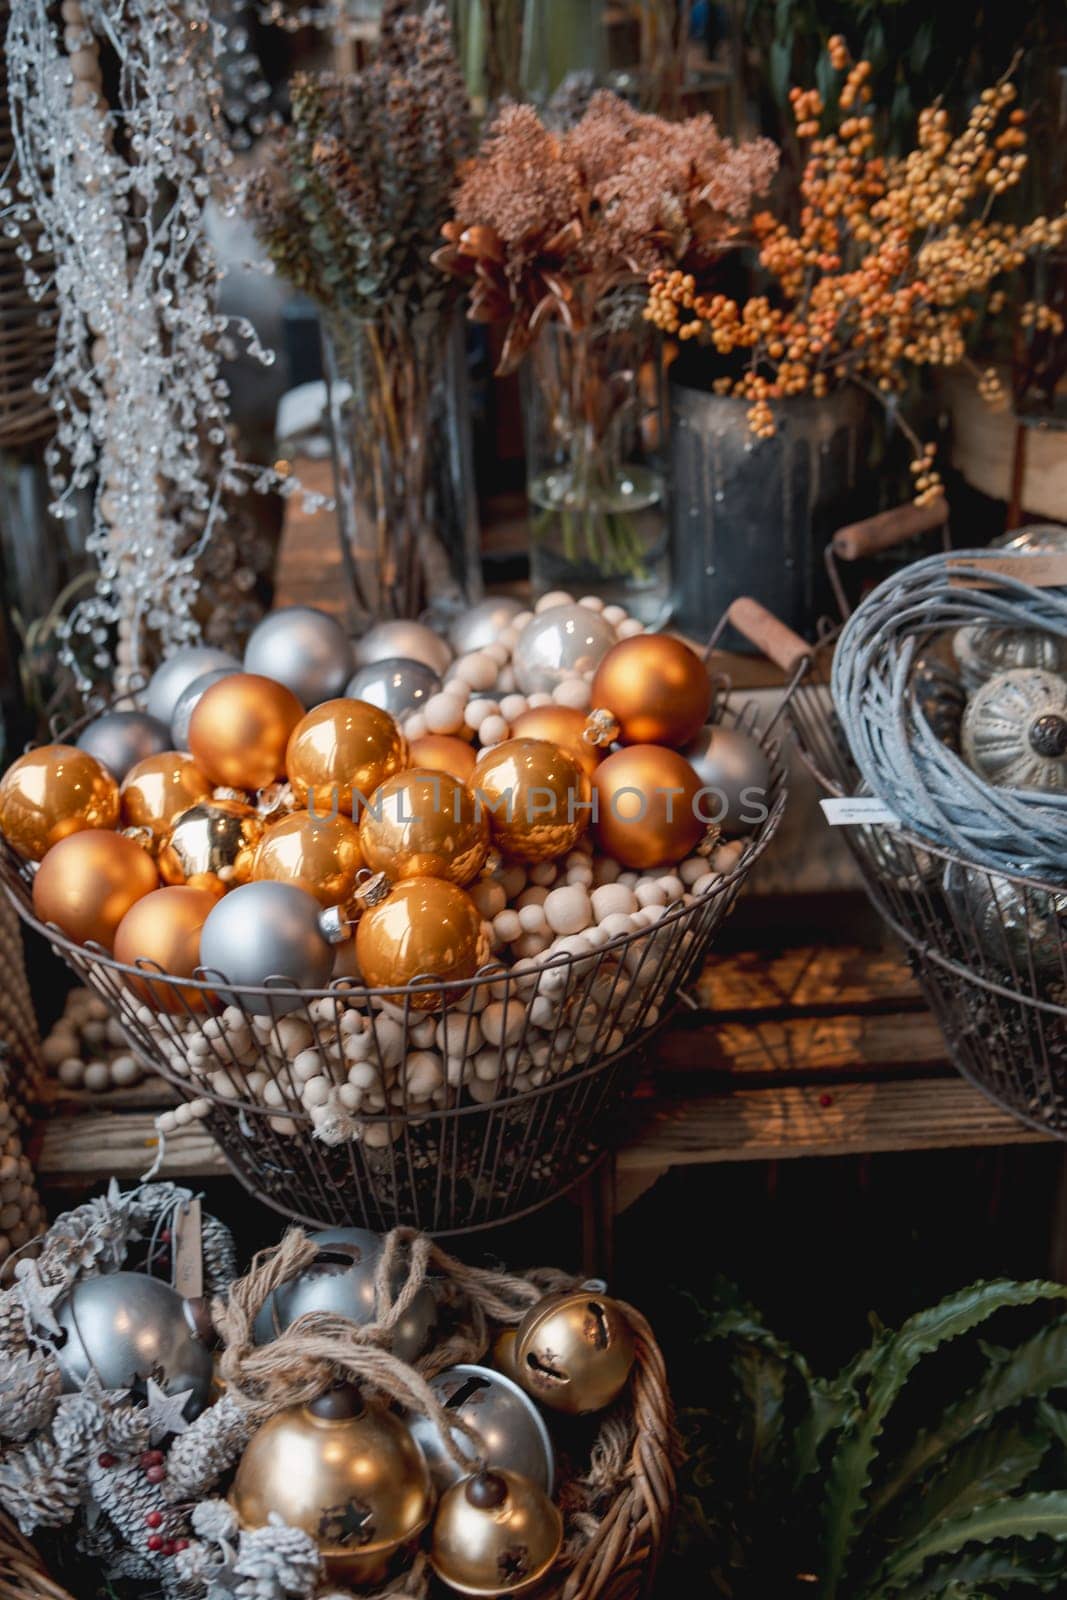 Festive and elegant New Year's decorations on the store's counter. High quality photo